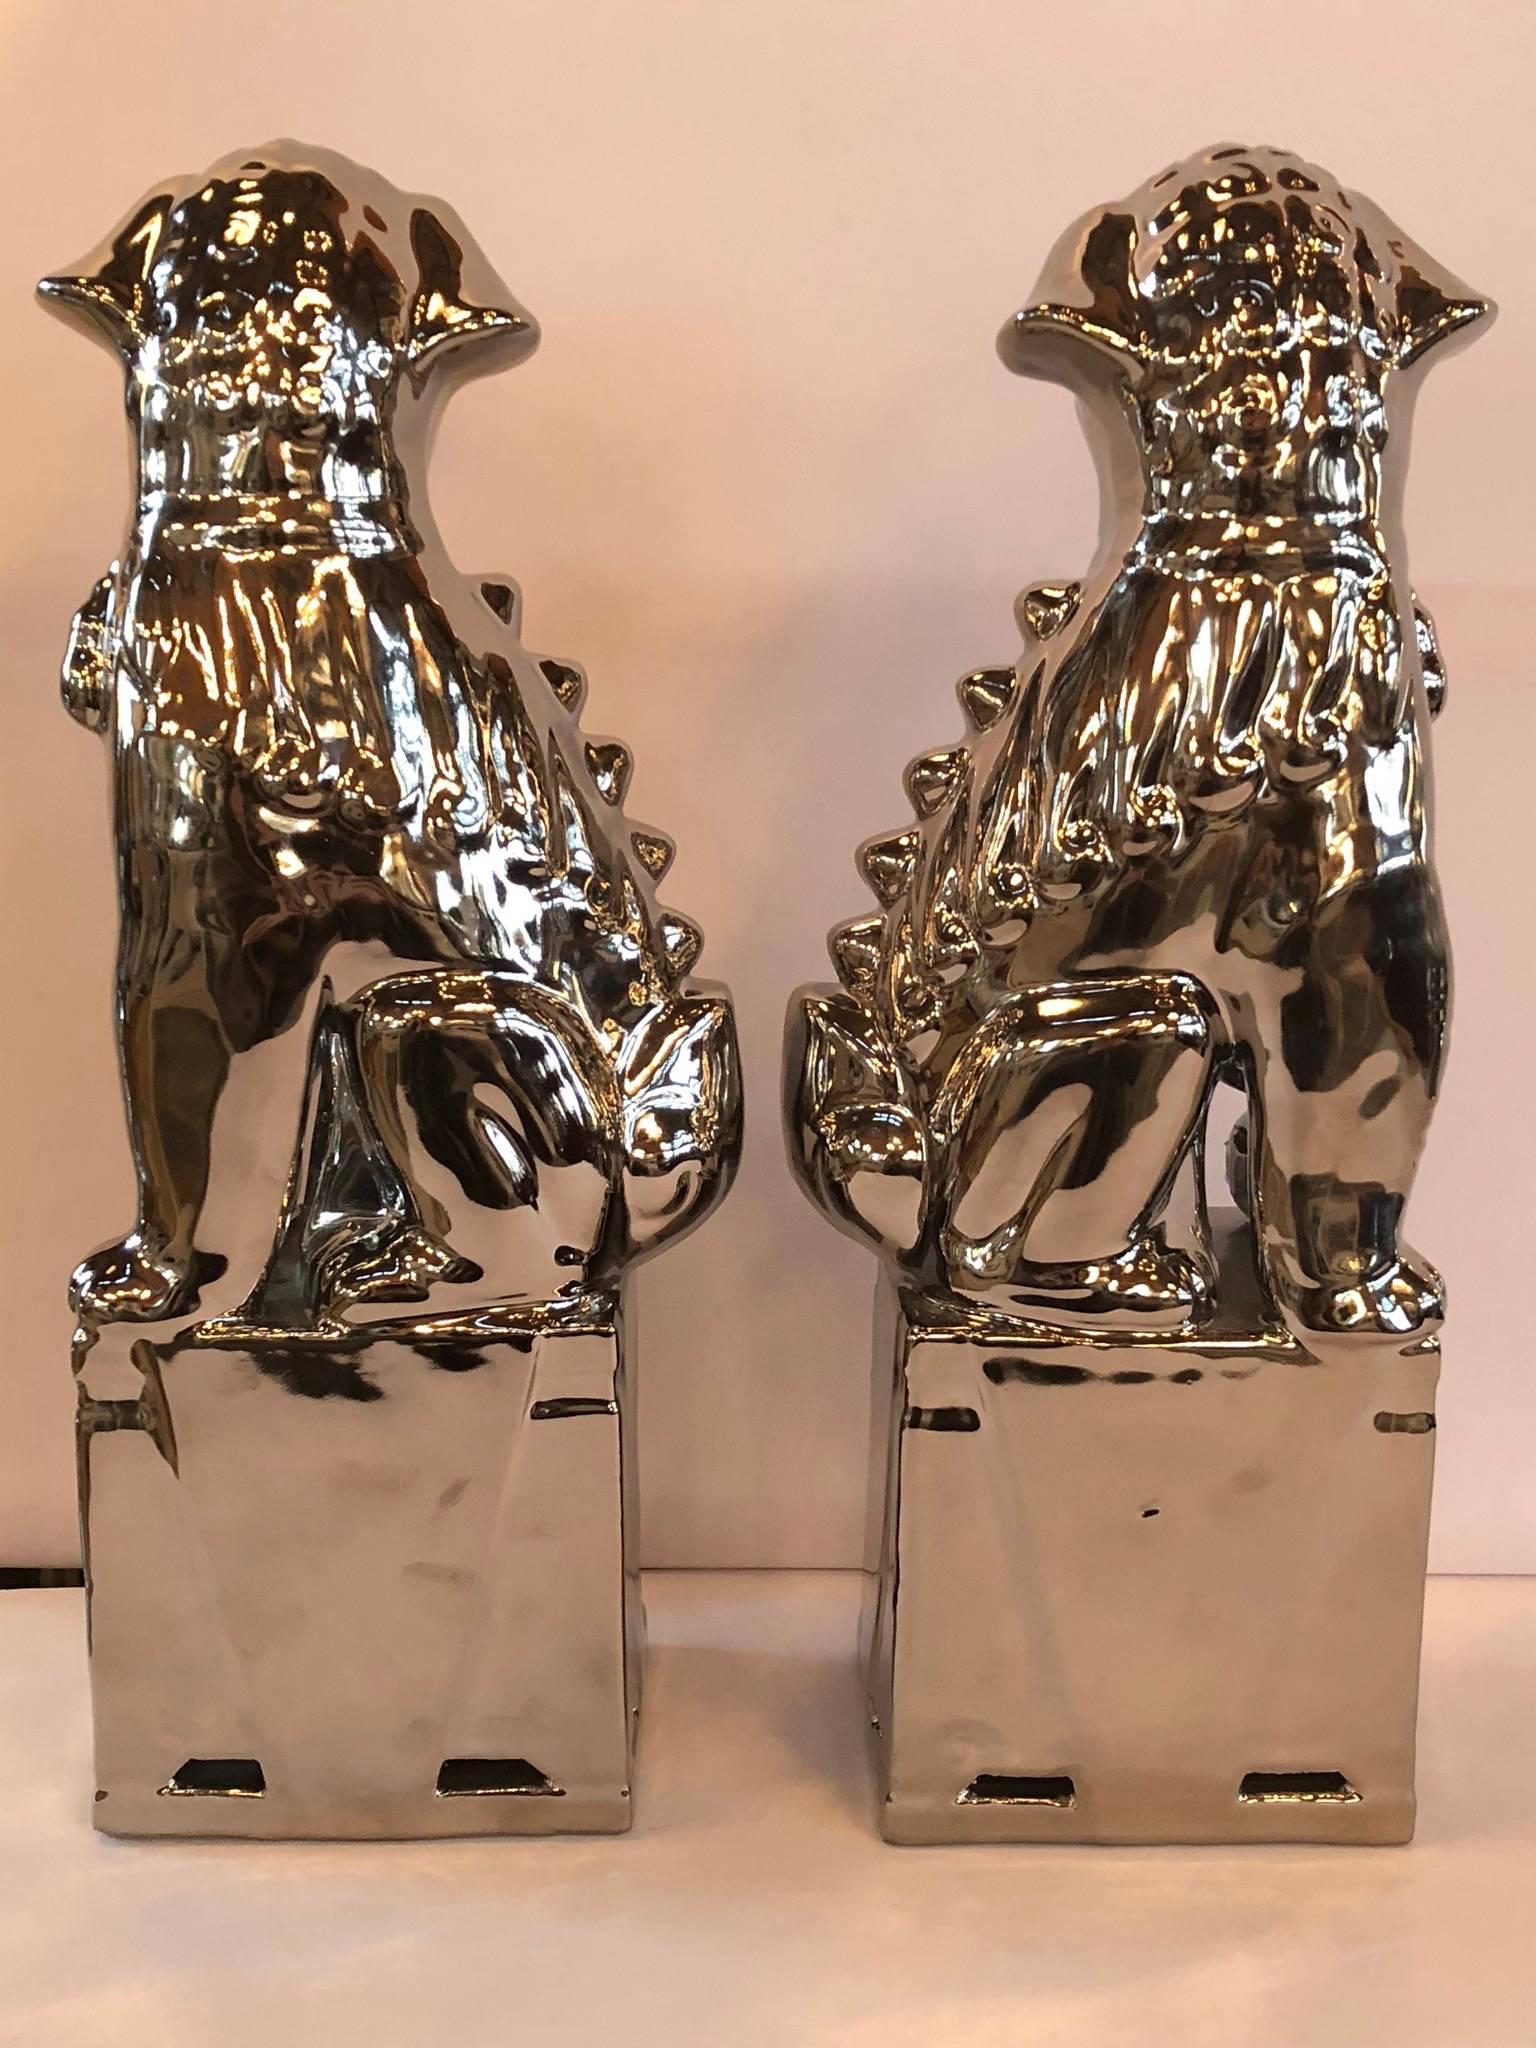 Pair of large silver foo dogs. Measures: 4.75